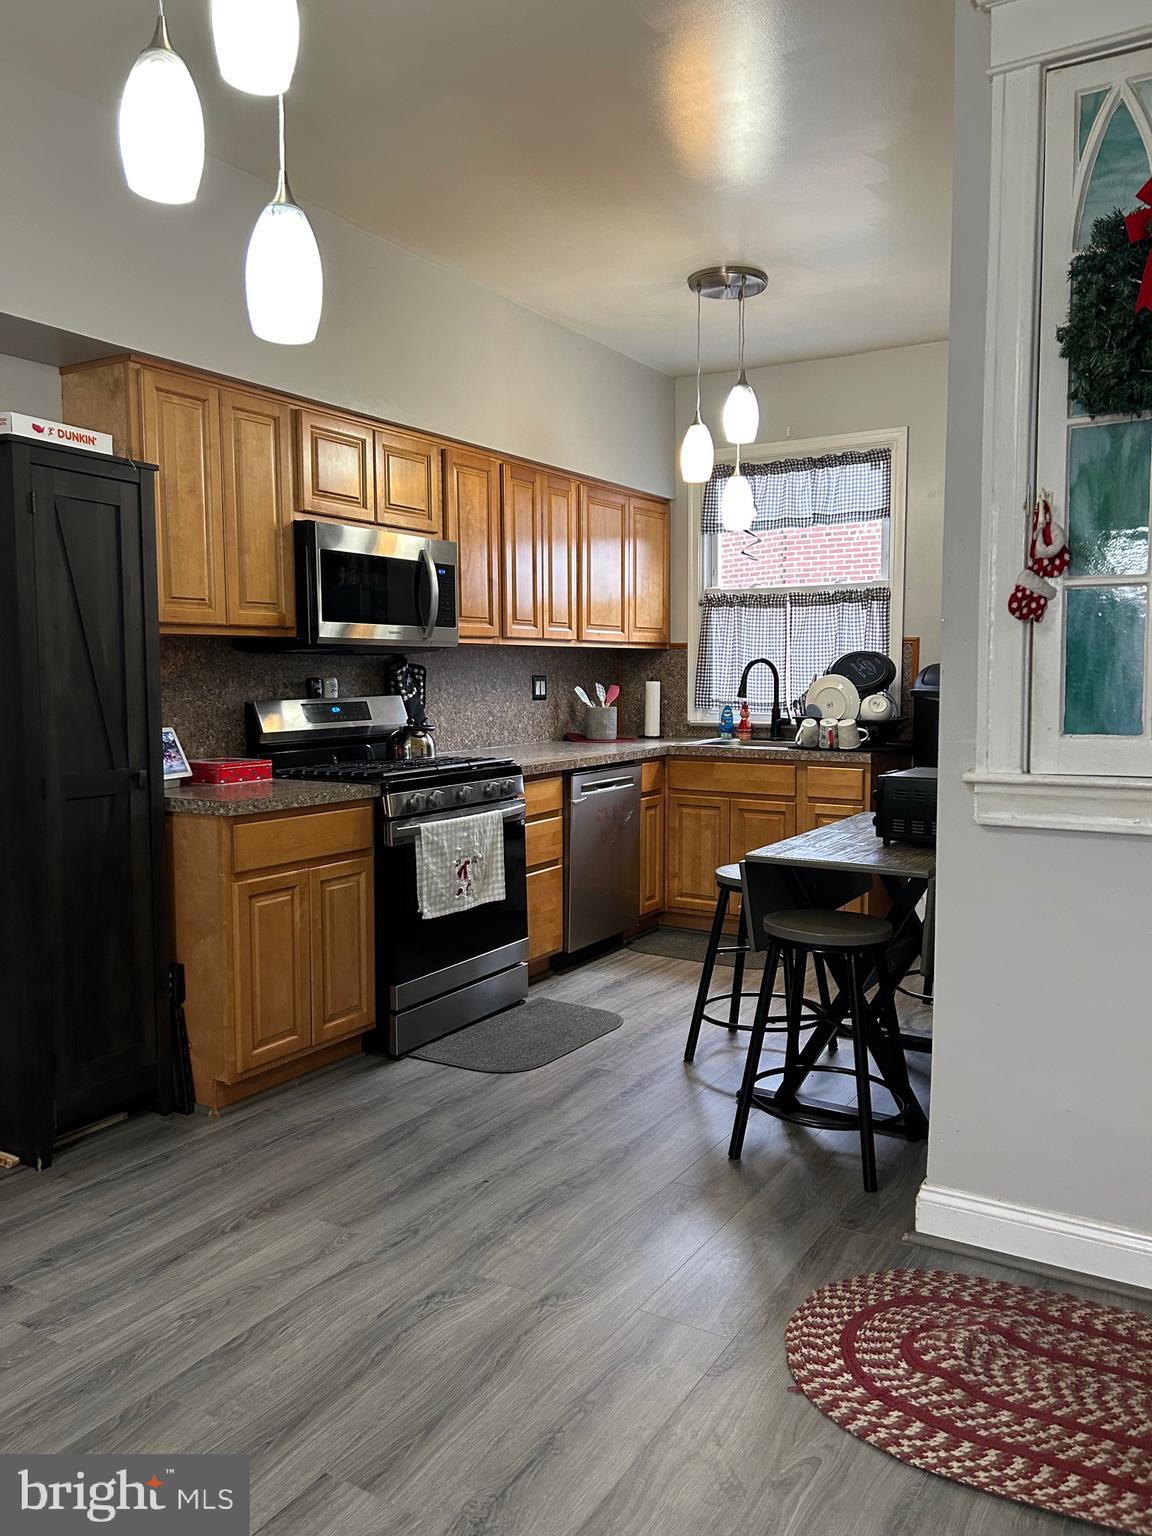 a kitchen with stainless steel appliances granite countertop a sink dishwasher a stove a refrigerator a microwave oven with cabinets and wooden floor